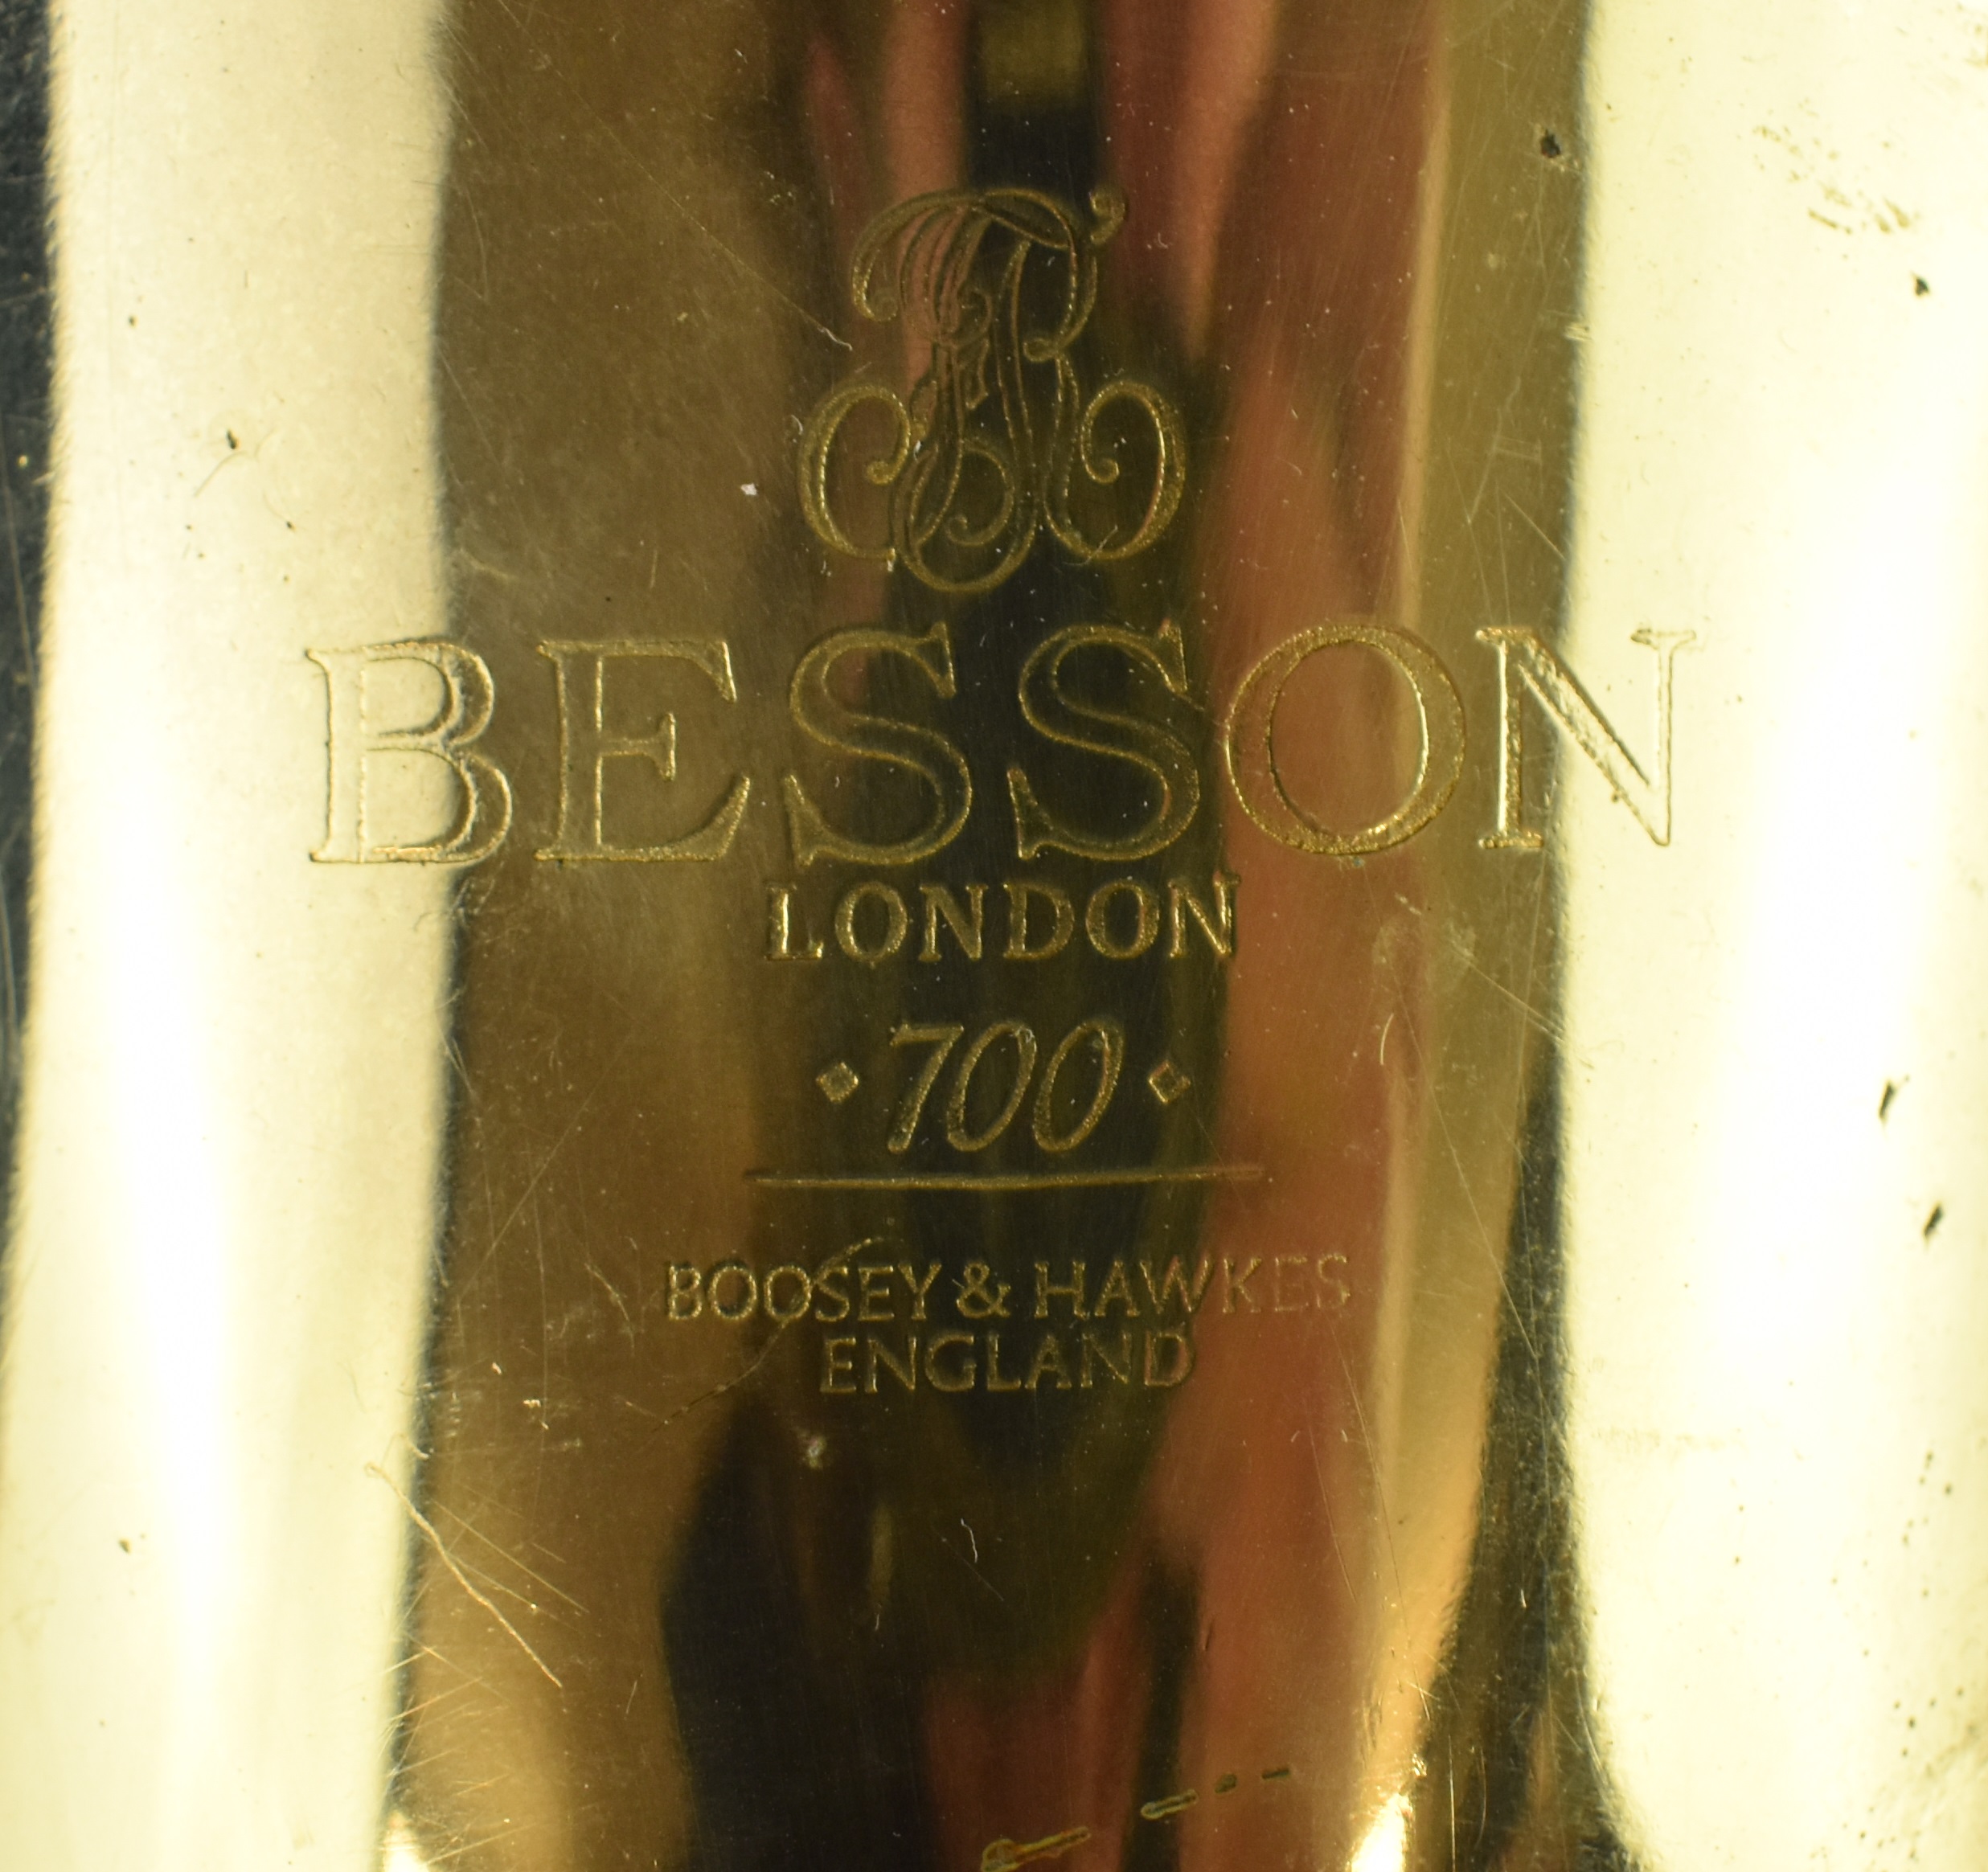 Boosey & Hawkes Besson 700 brass Euphonium, serial no. 765-718418, in fitted hard shell case with - Image 4 of 7